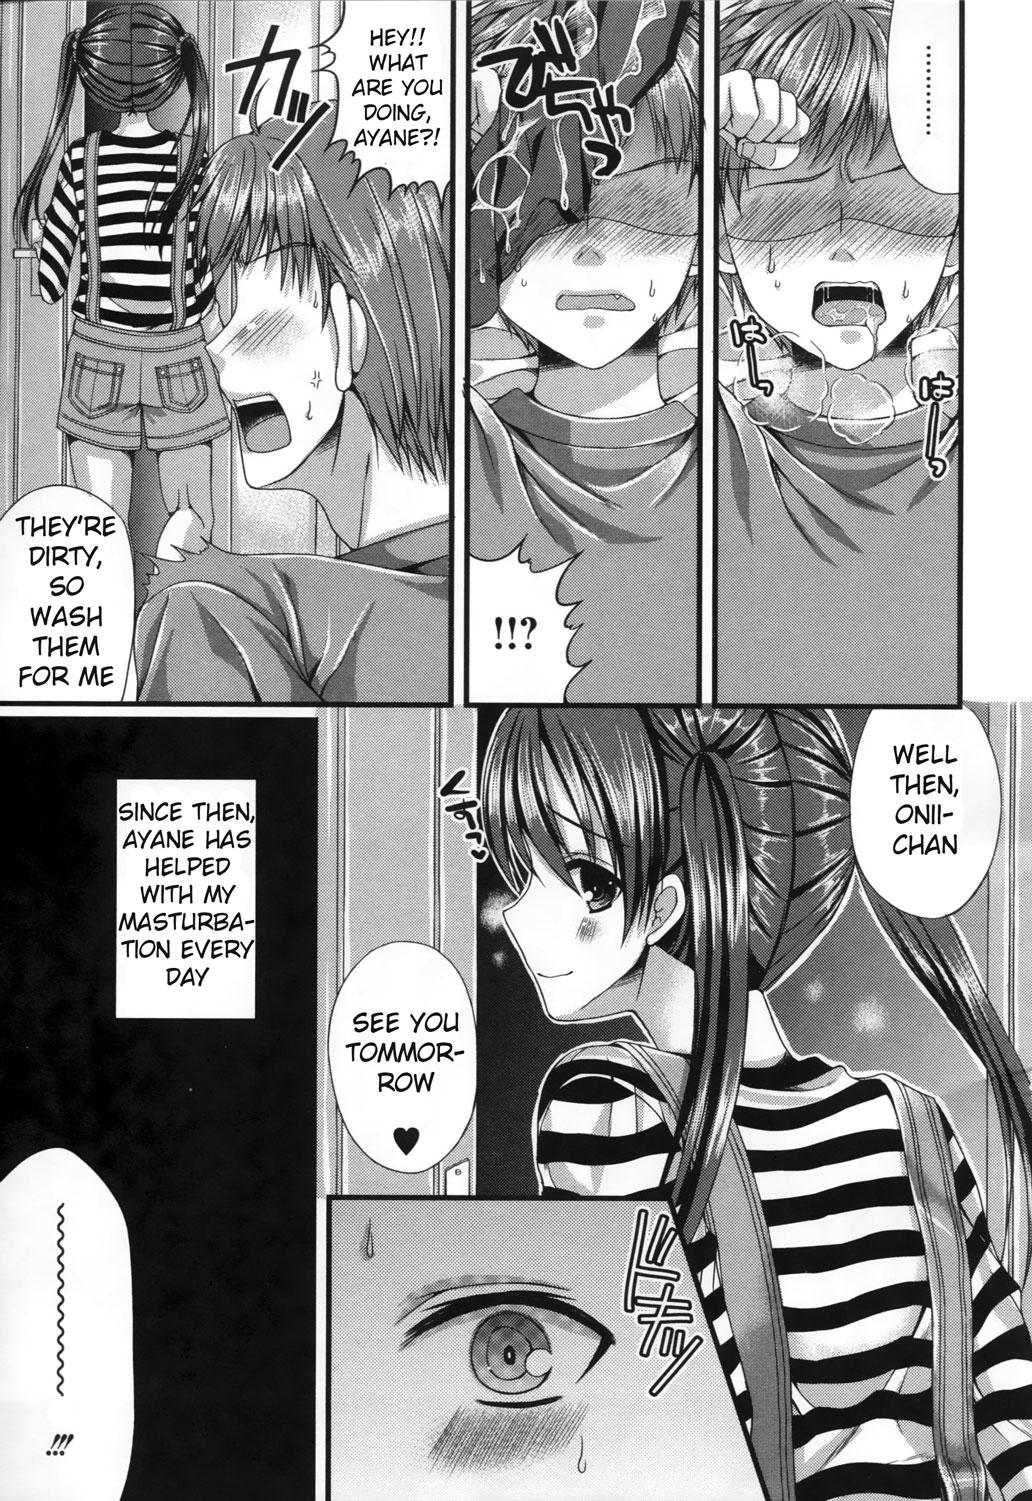 Cheating Wife Onii-chan training diary Scene - Page 7